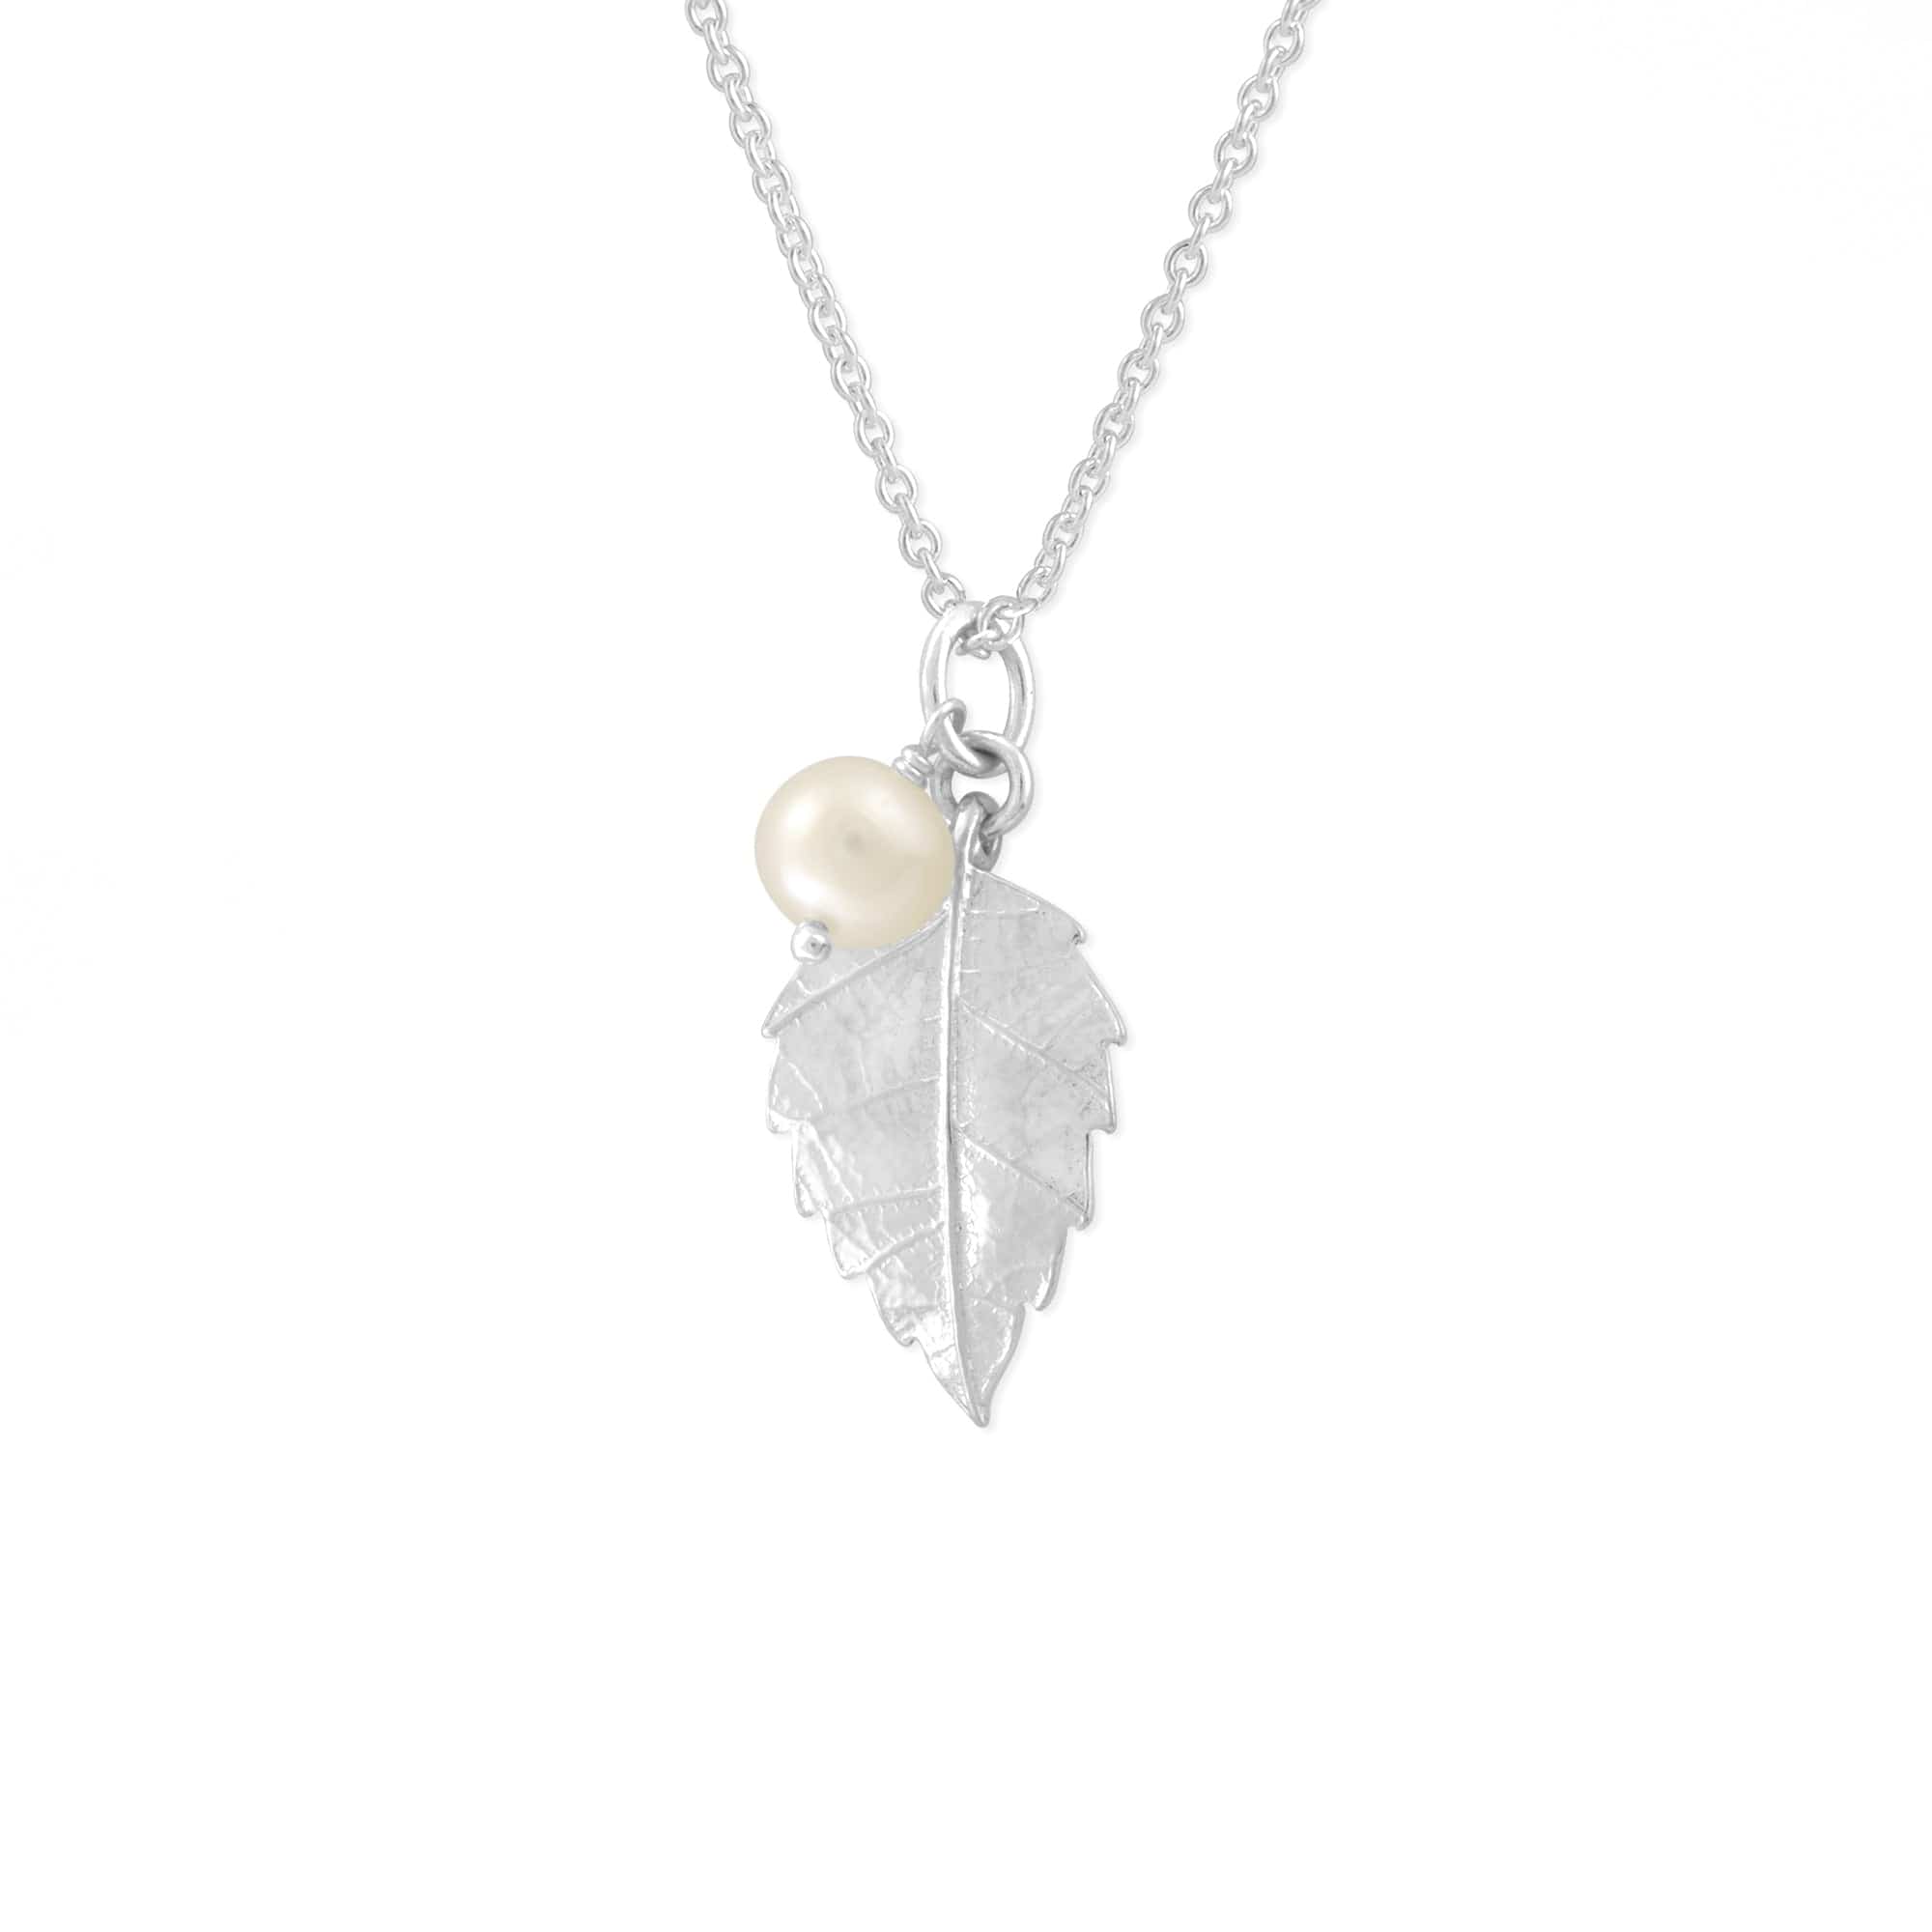 Boma Jewelry Necklaces Sterling Silver Leaf and Pearl Necklace